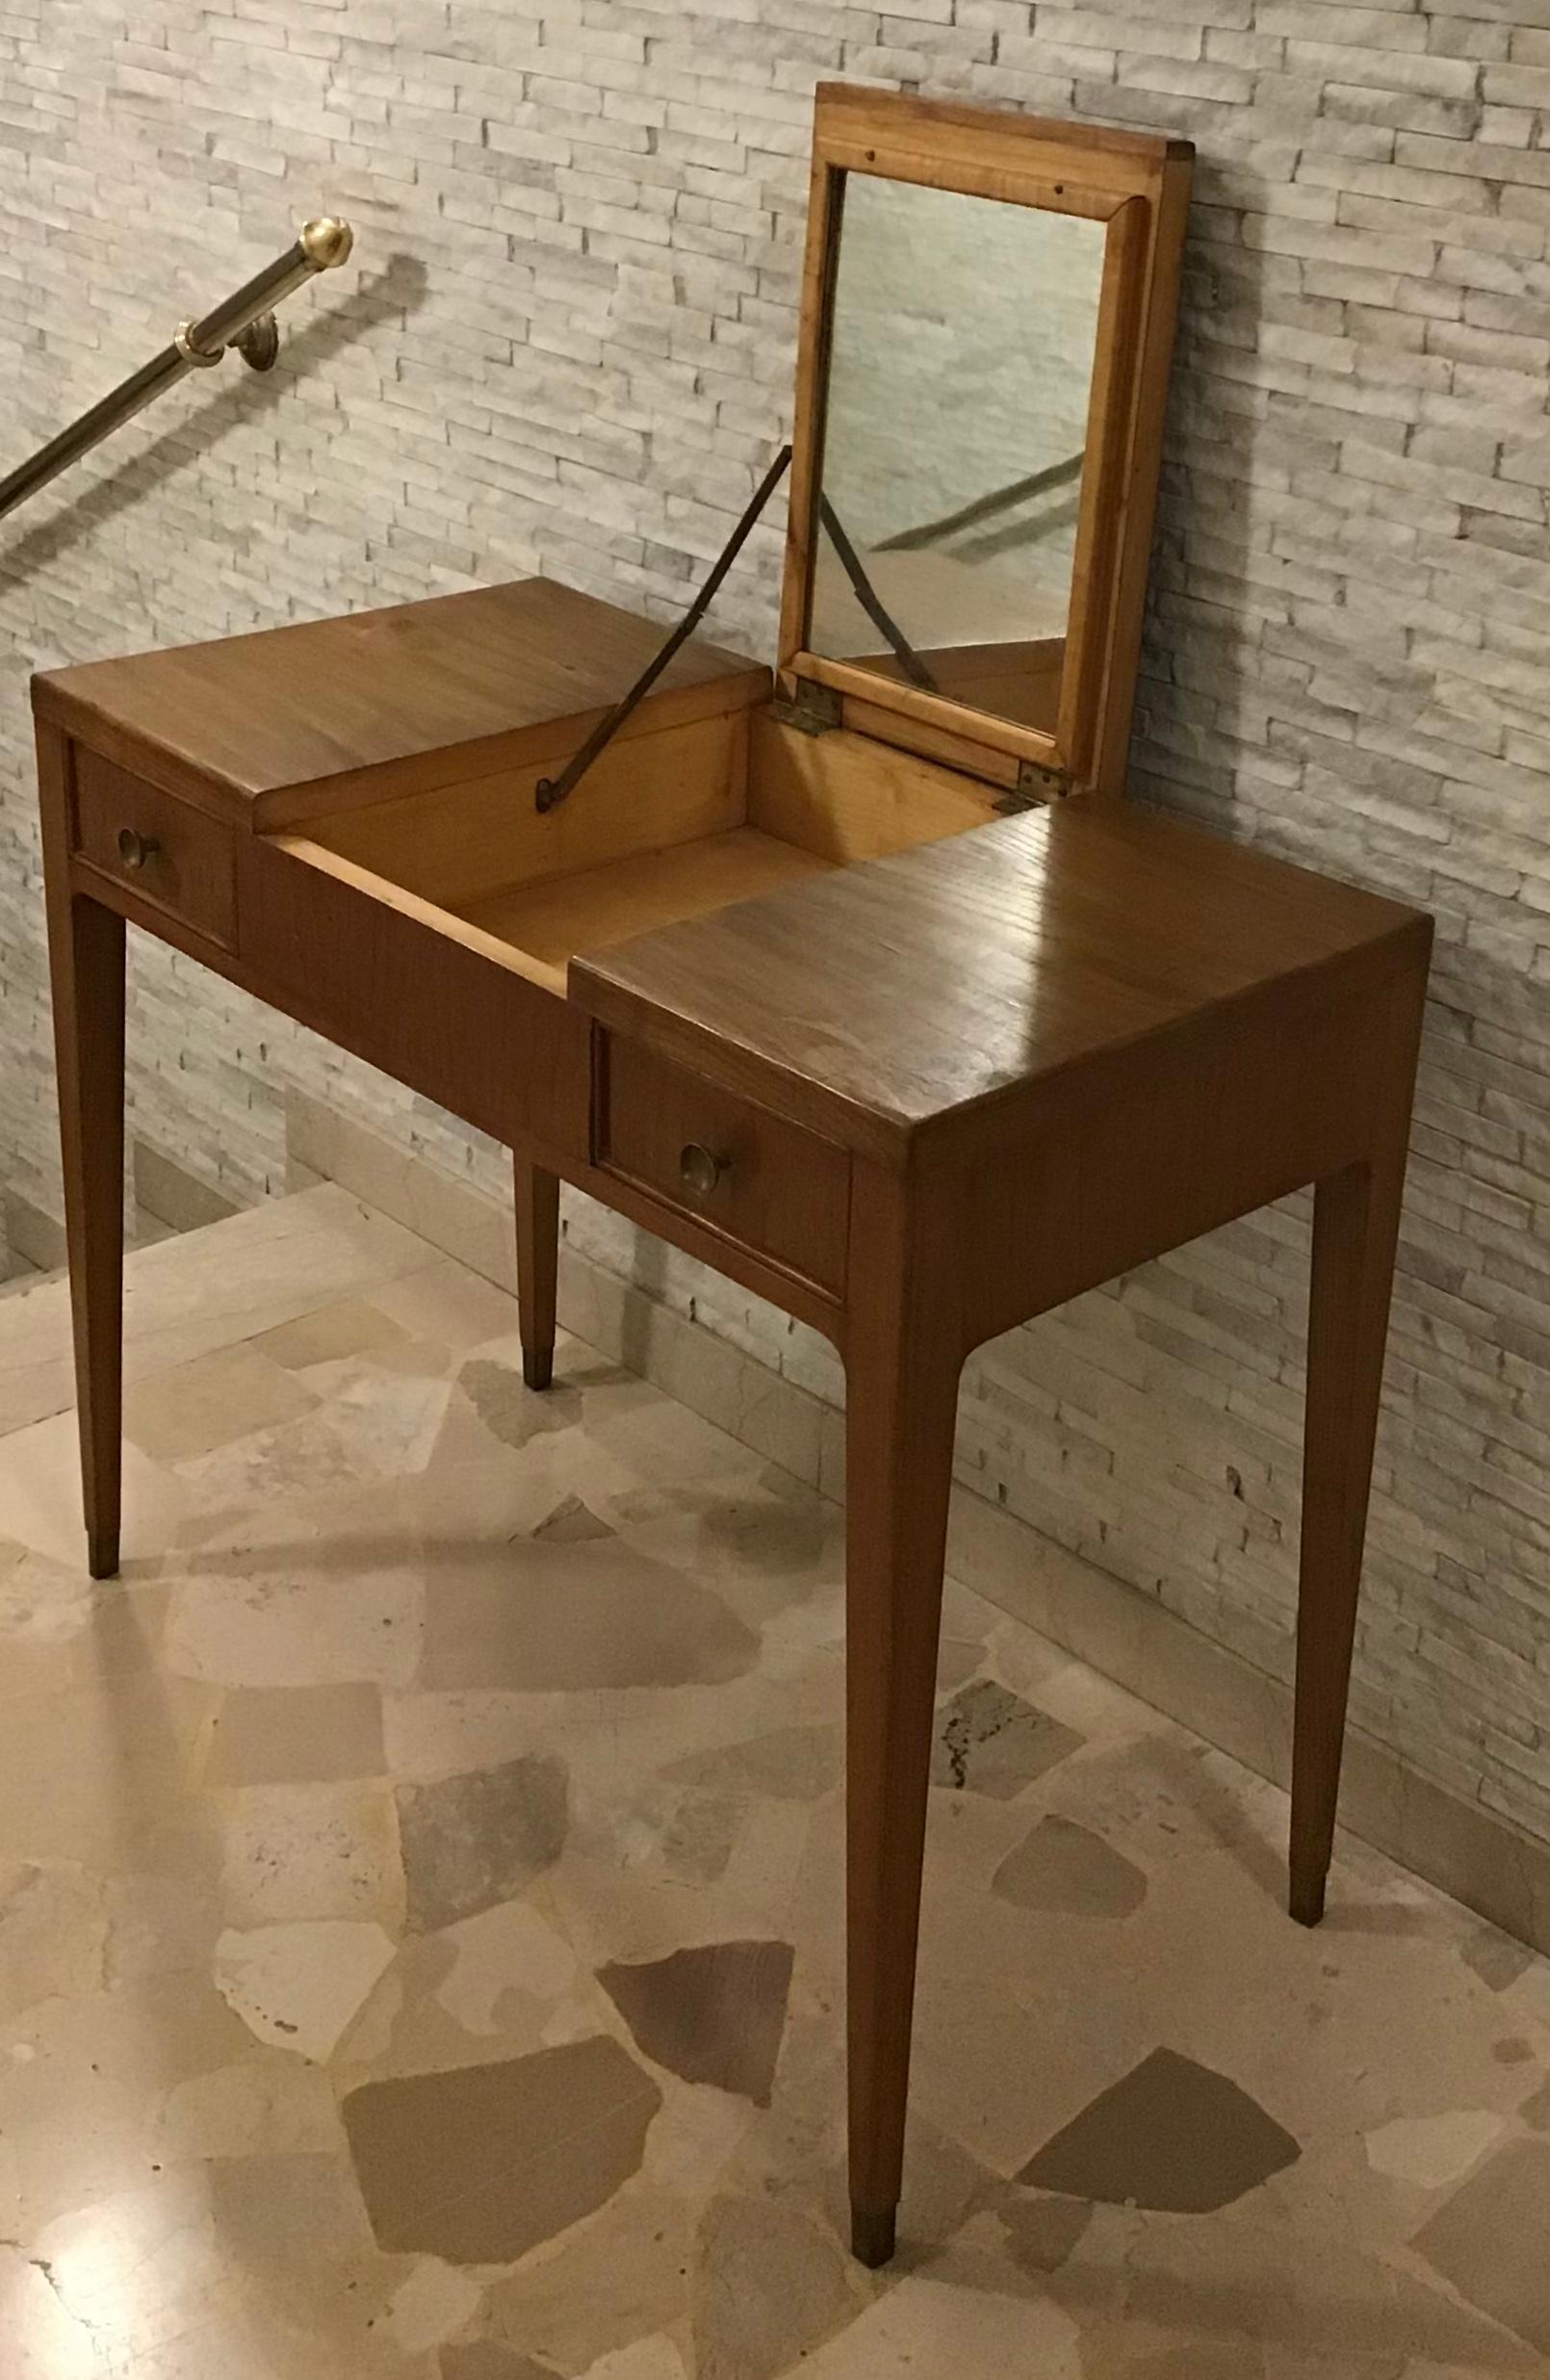 Gio’ Ponti “Style” Toilet /Desk Wood Brass, 1950, Italy For Sale 4